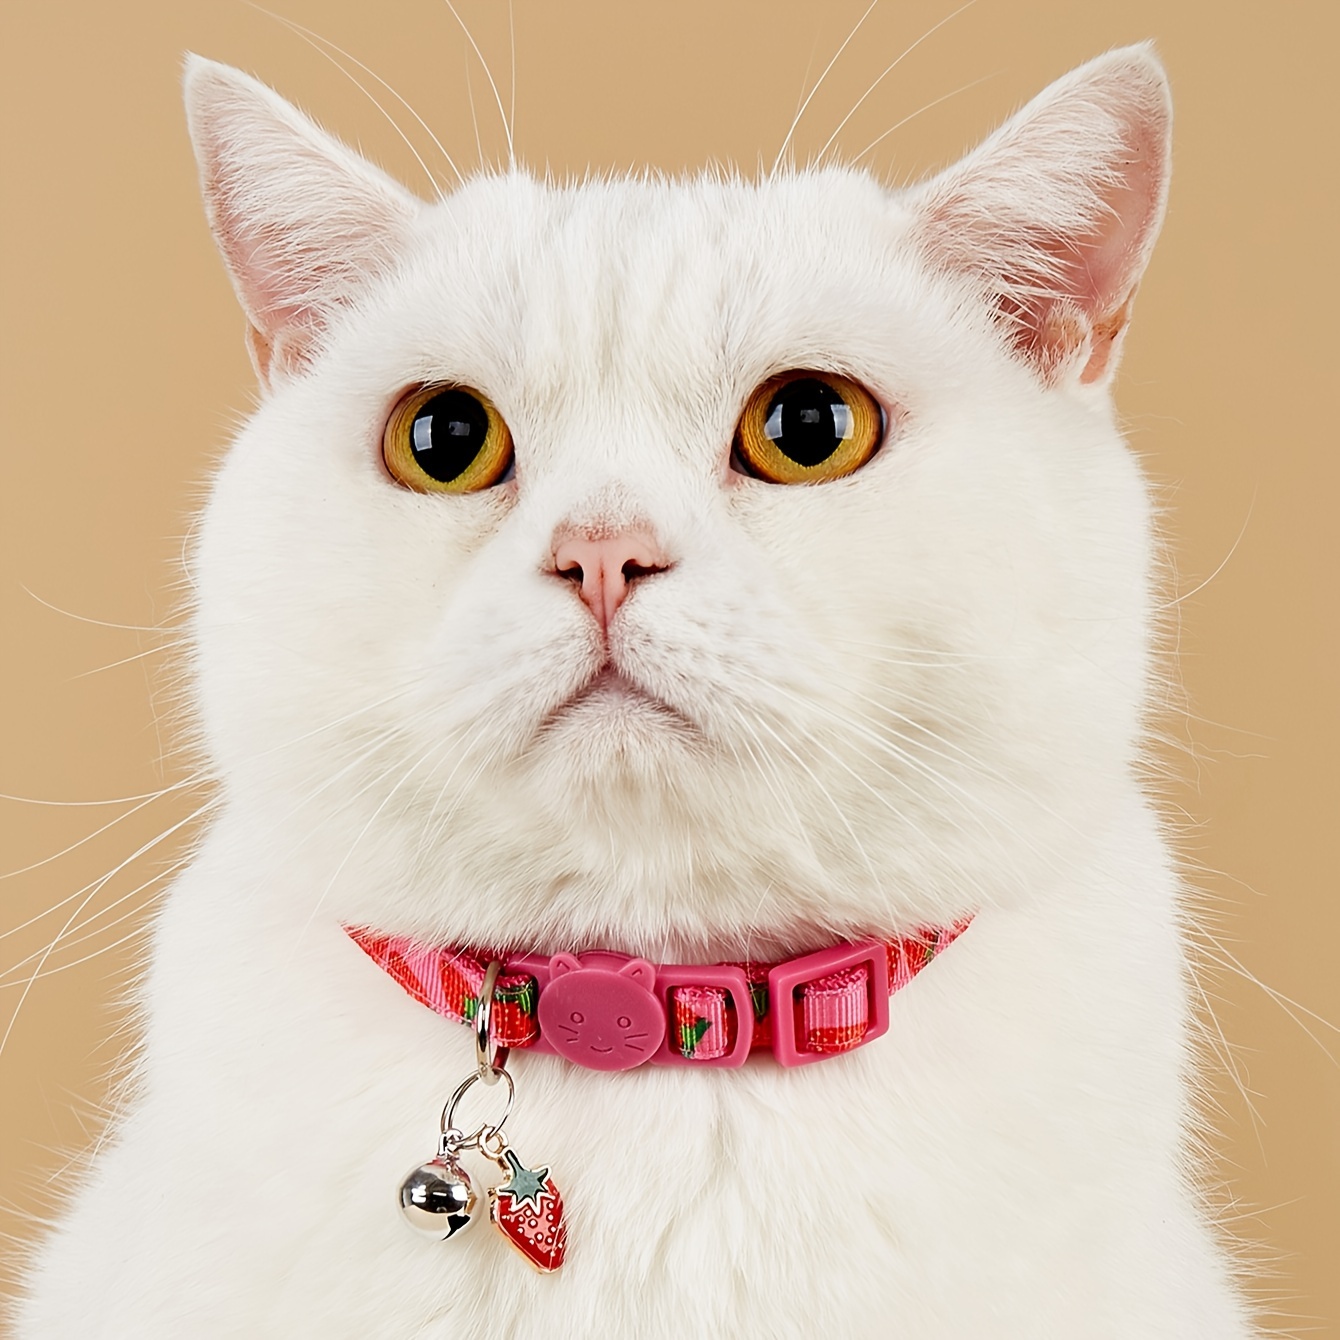 

Breakaway Cat Collar With Bell, Colorful Fruit Pattern Adjustable Length Pet Collar For Cat Kitten Dog Puppy